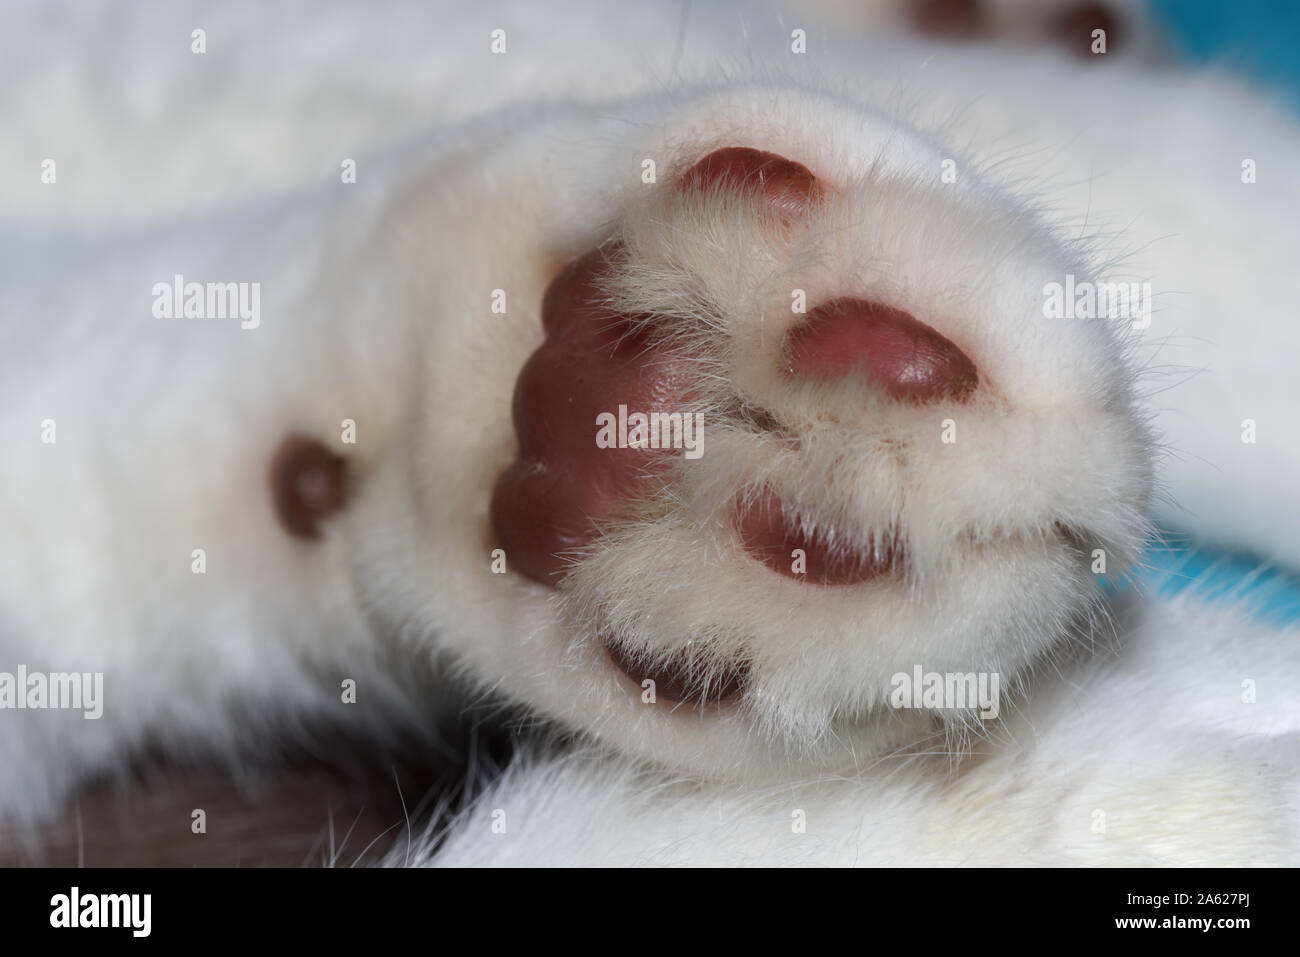 Close-up of a cat's paw with white fur from below Stock Photo